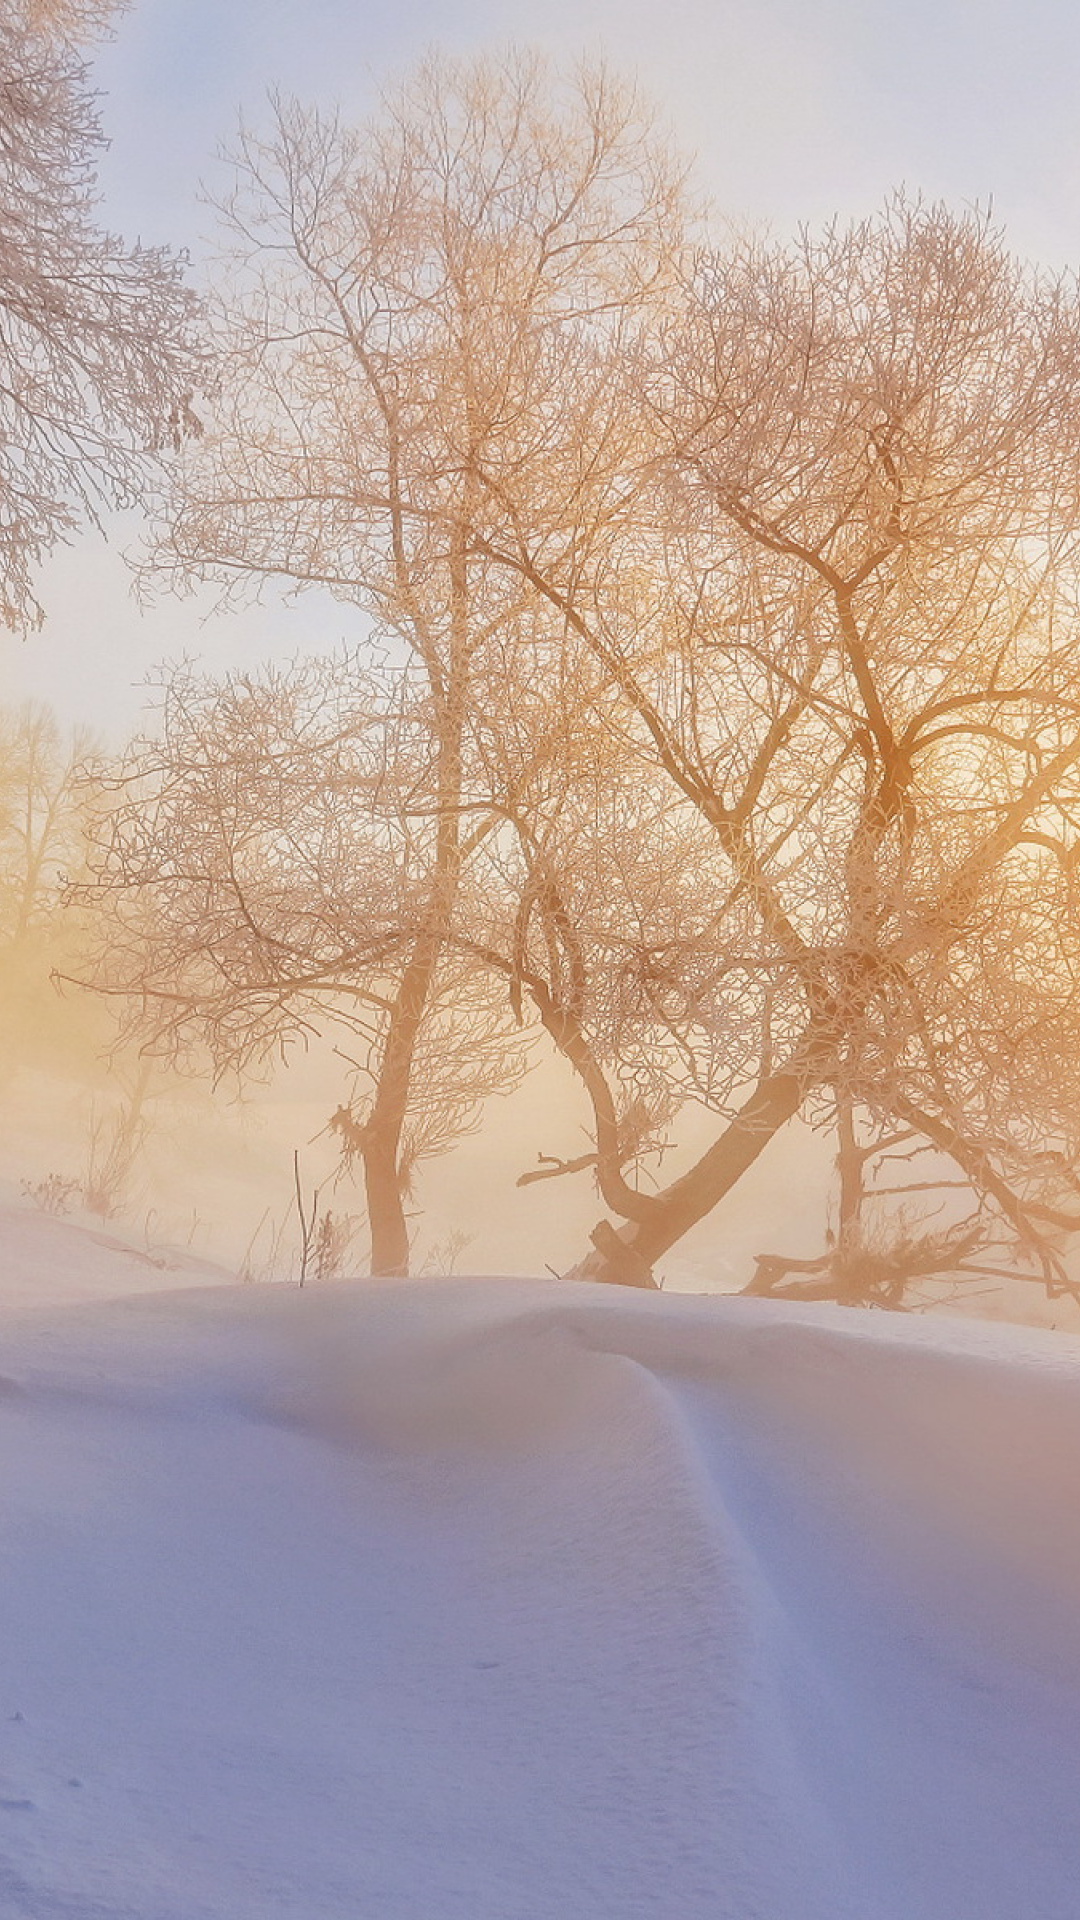 Morning in winter forest screenshot #1 1080x1920